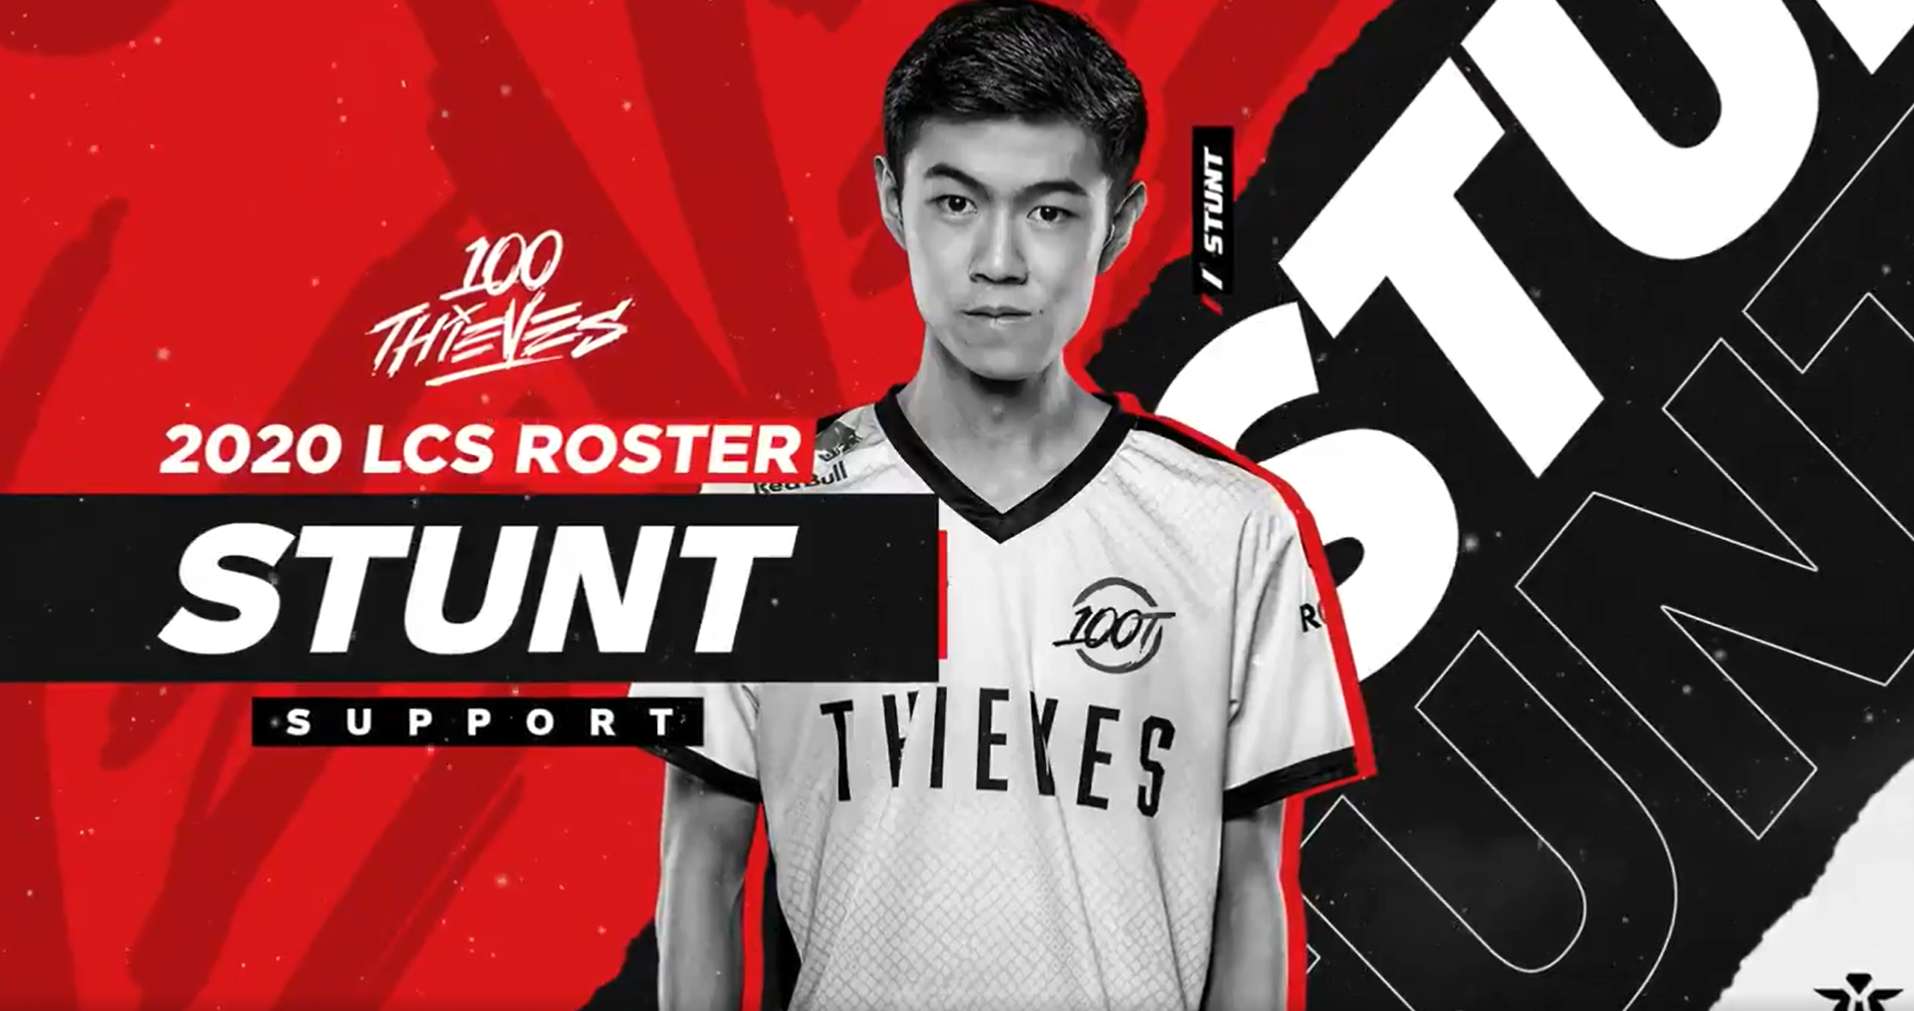 100 Thieves Announces The Promotion Of William ‘Stunt’ Chen To The Main Roster